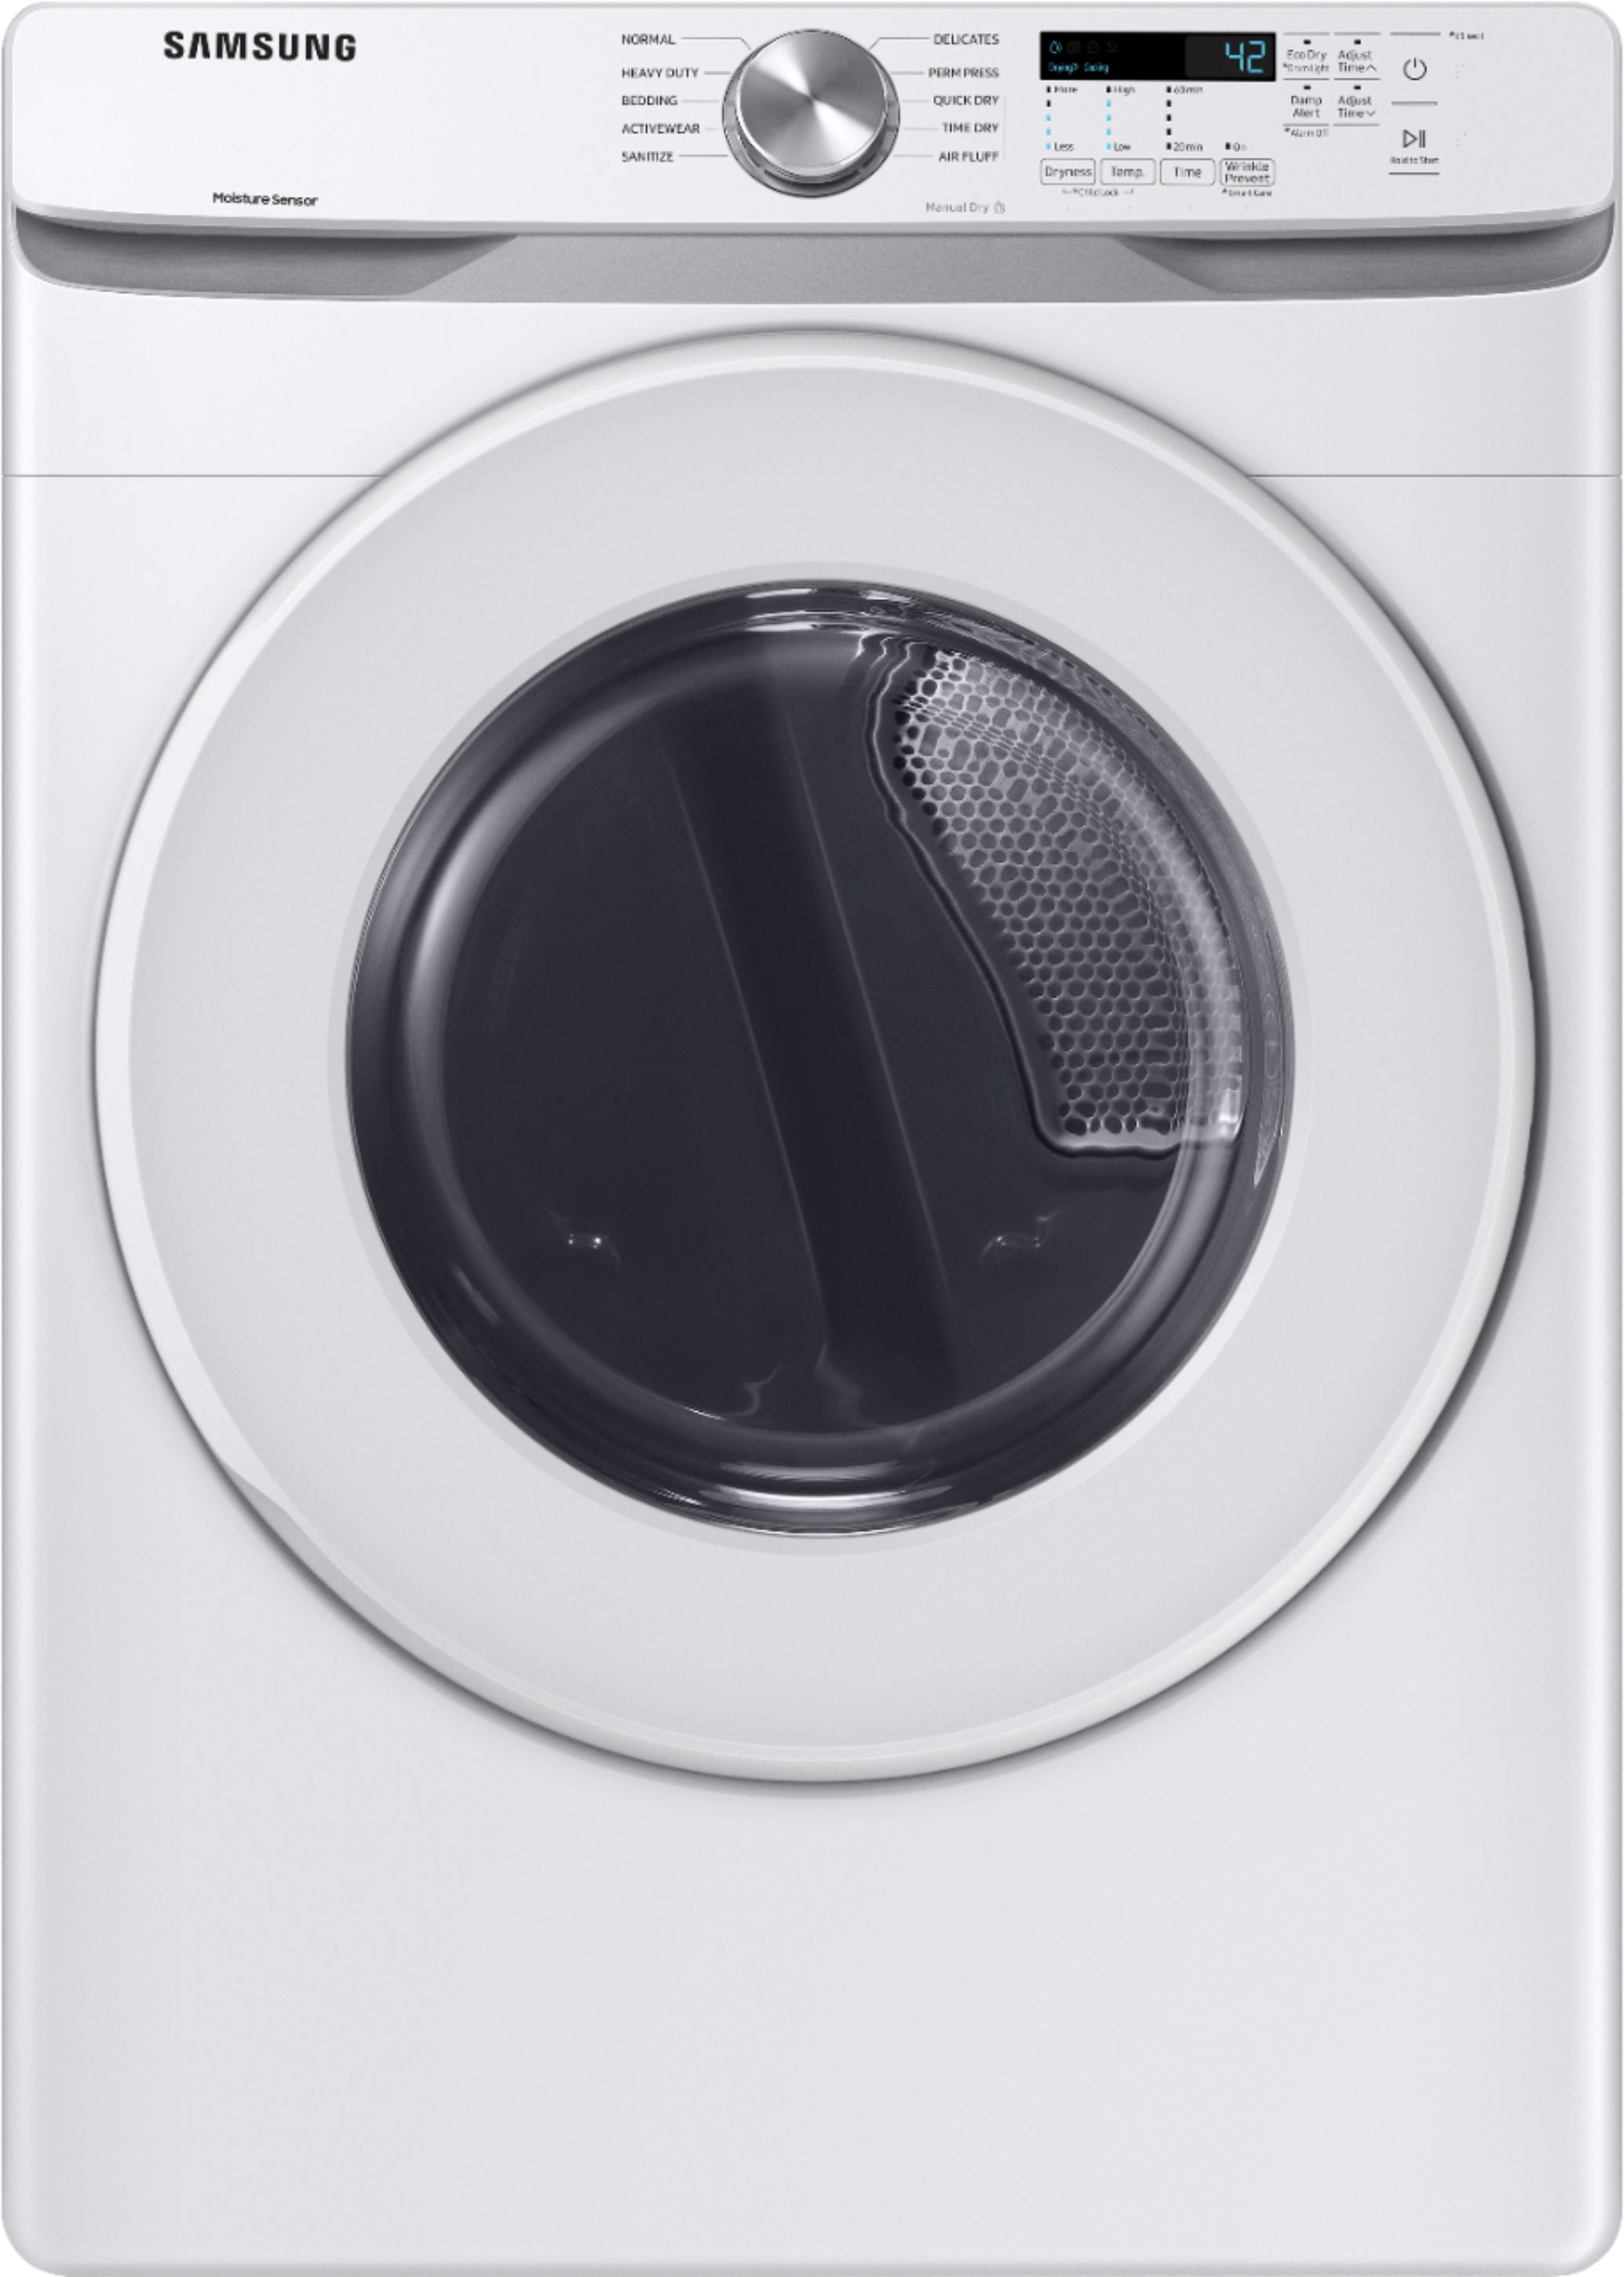 Samsung - 7.5 cu. ft. Long Vent Gas Dryer with Sensor Dry - White